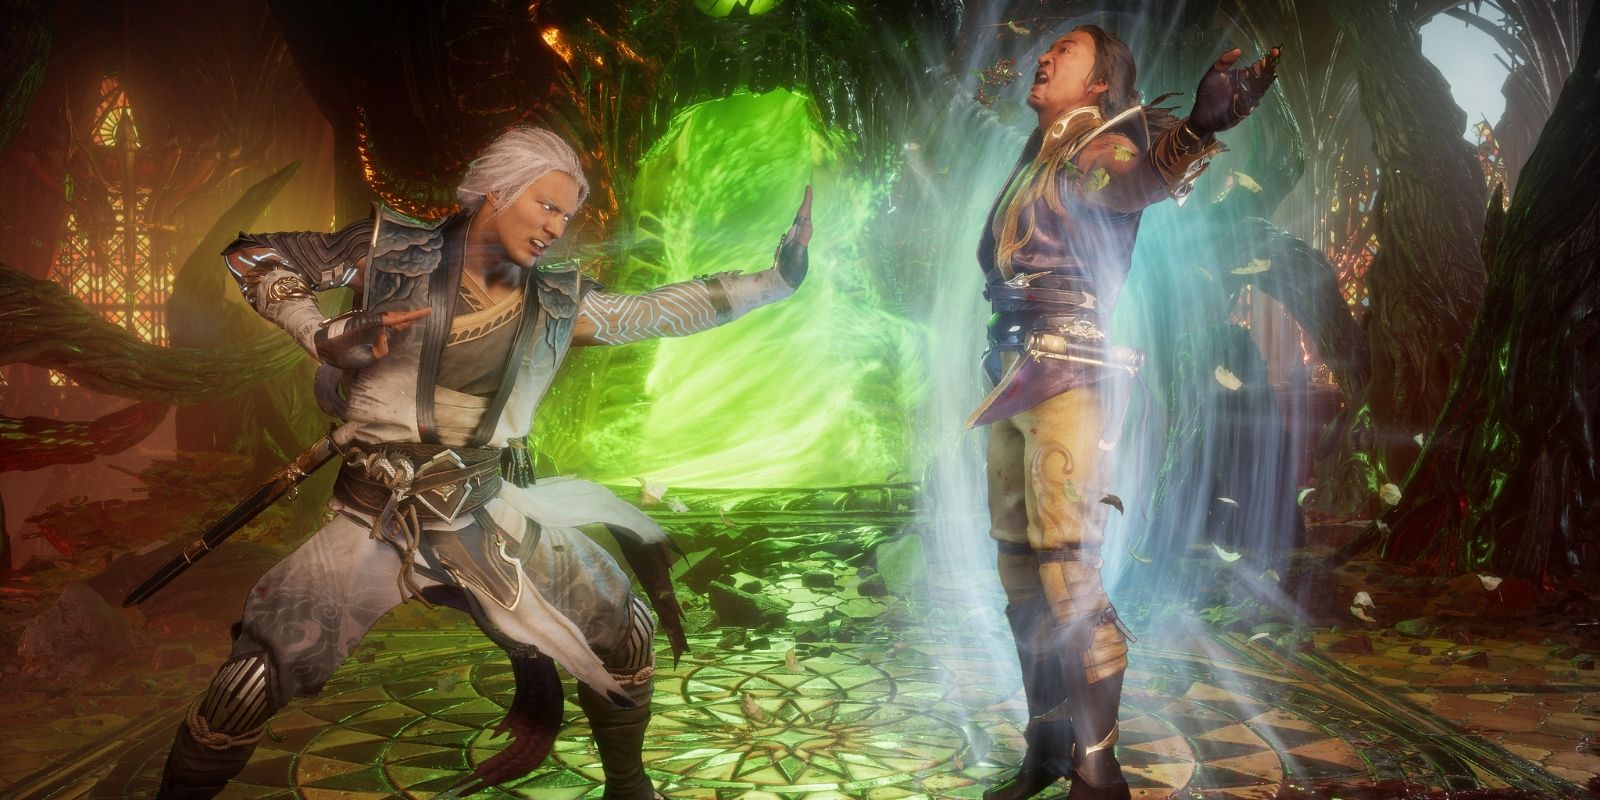 MK11 Shang Tsung Friendship Input: How to do Shang Tsung's Friendship in  Mortal Kombat 11 Aftermath update? - Daily Star